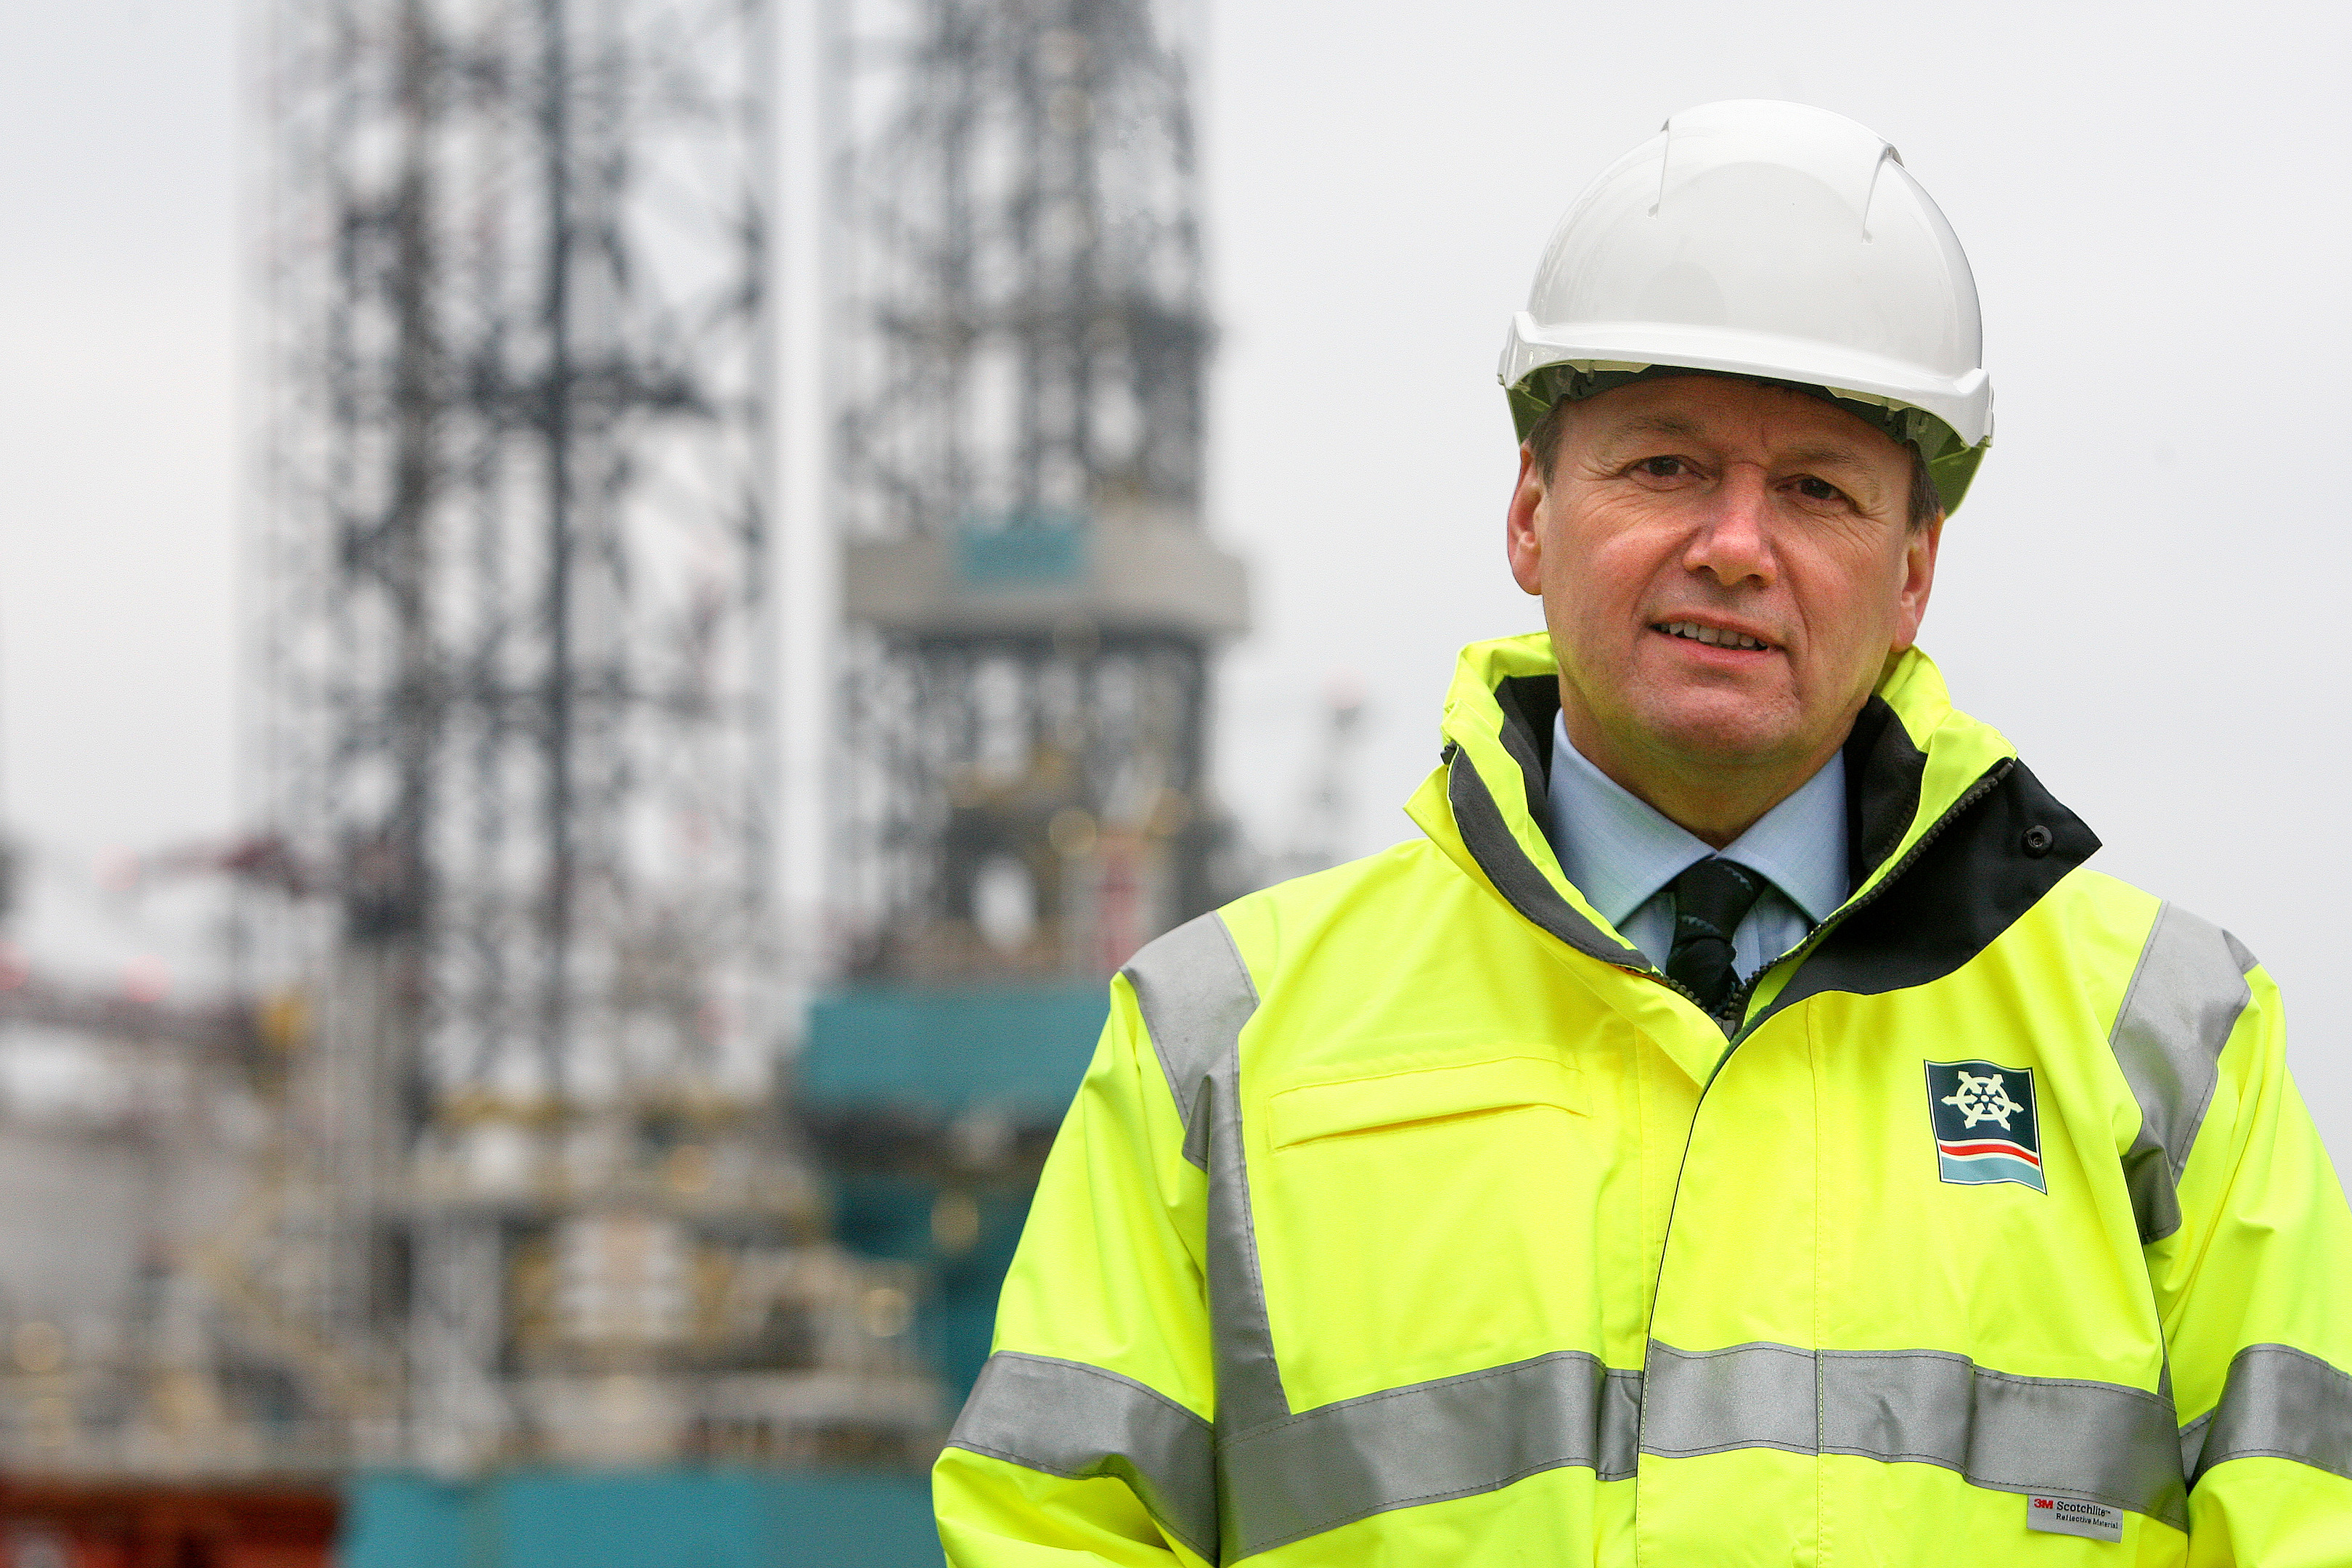 Charles Hammond, chief executive of Forth Ports.